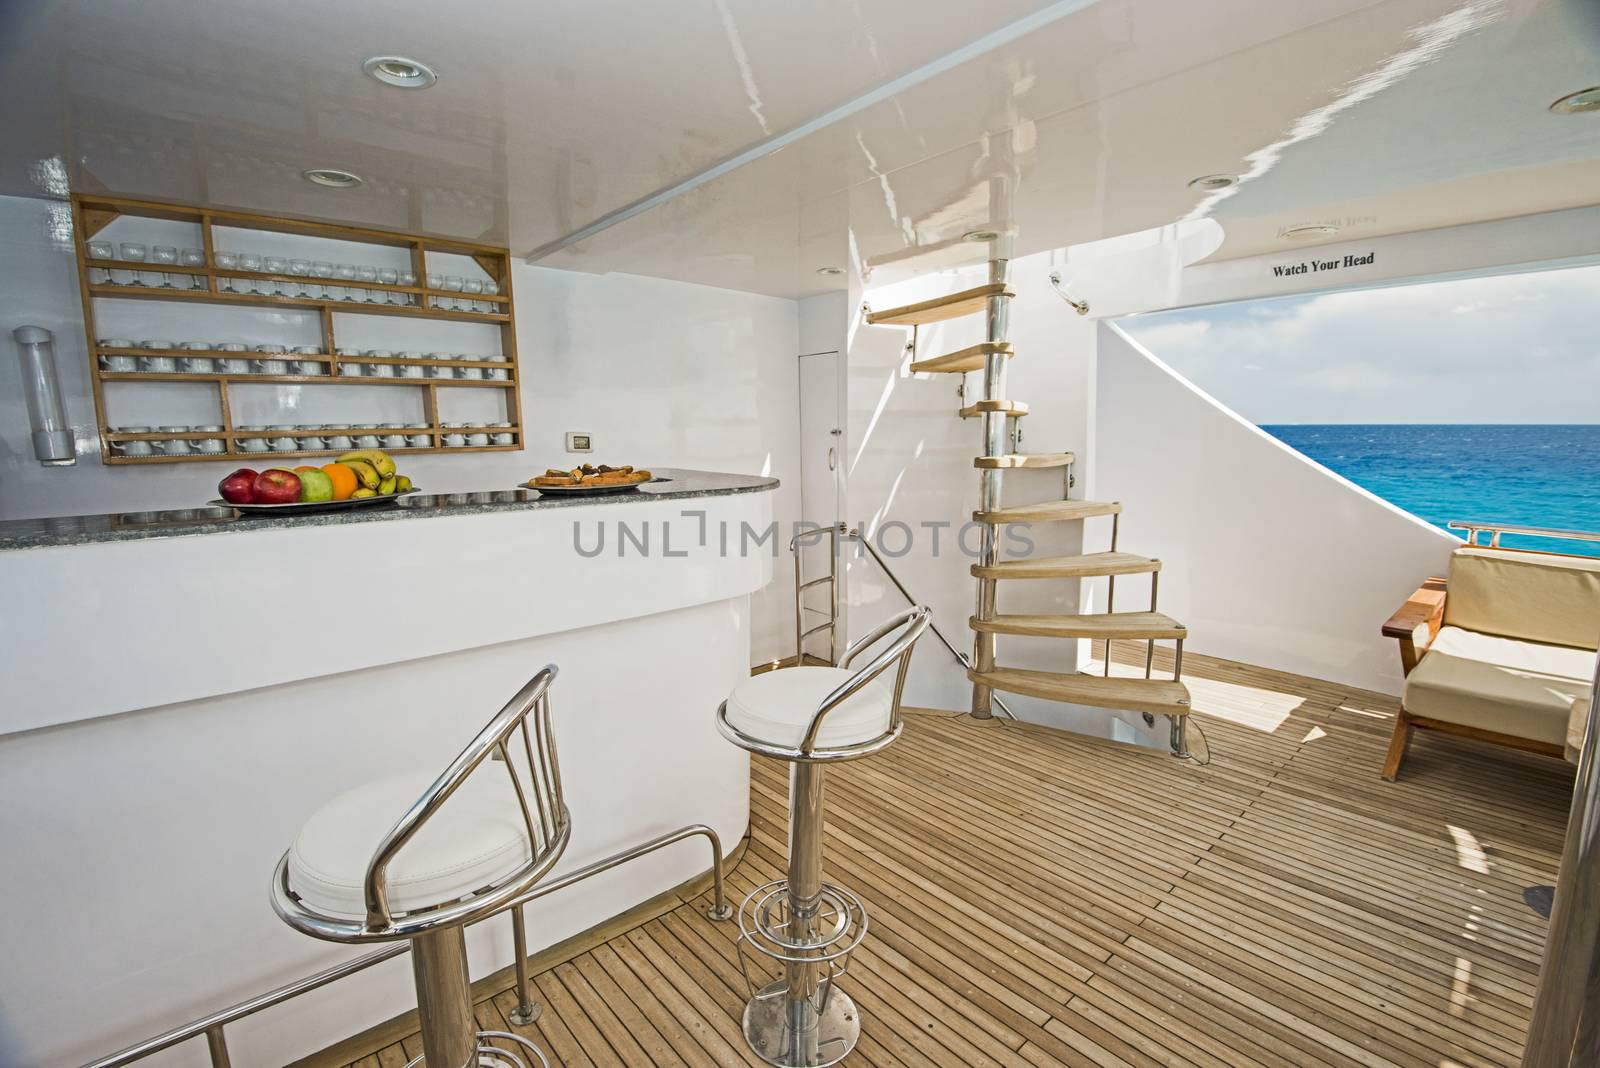 Rear sundeck of a large luxury motor yacht with bar area and tropical sea view background